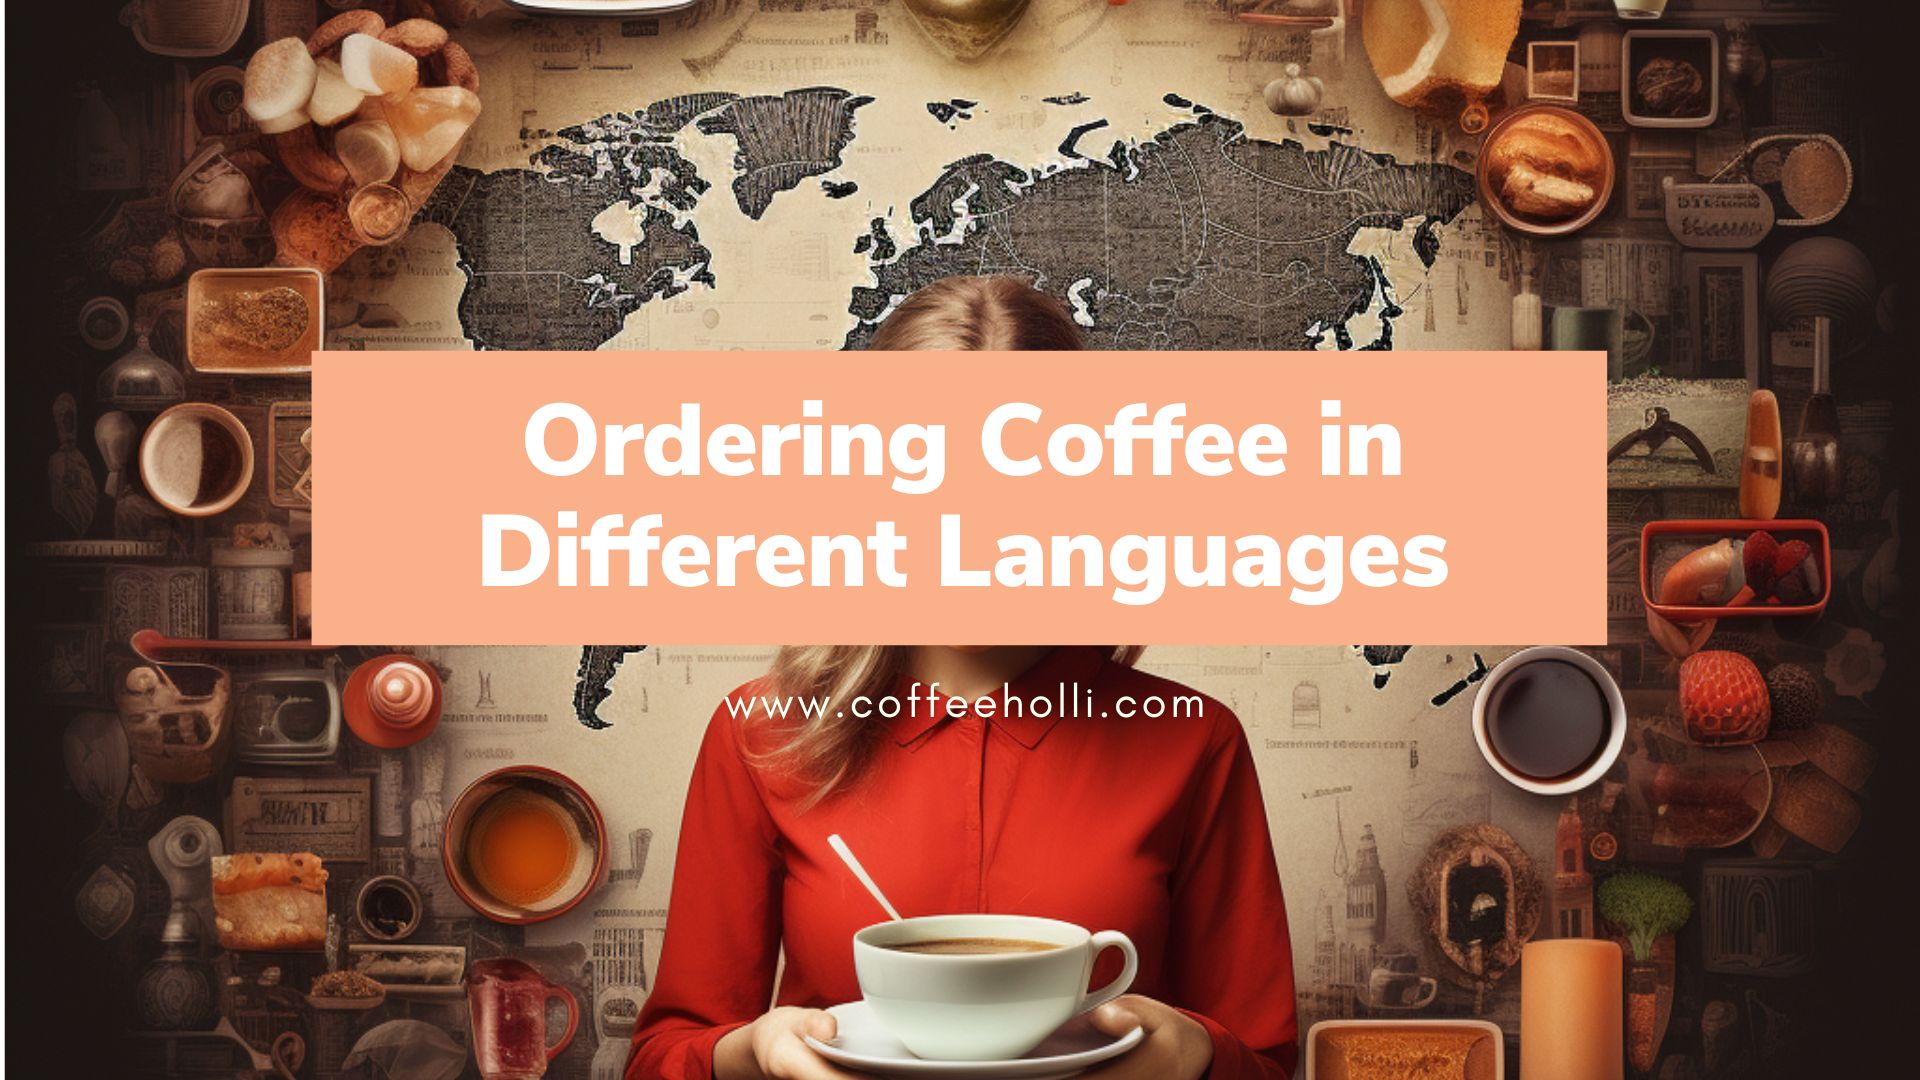 Ordering Coffee in Different Languages